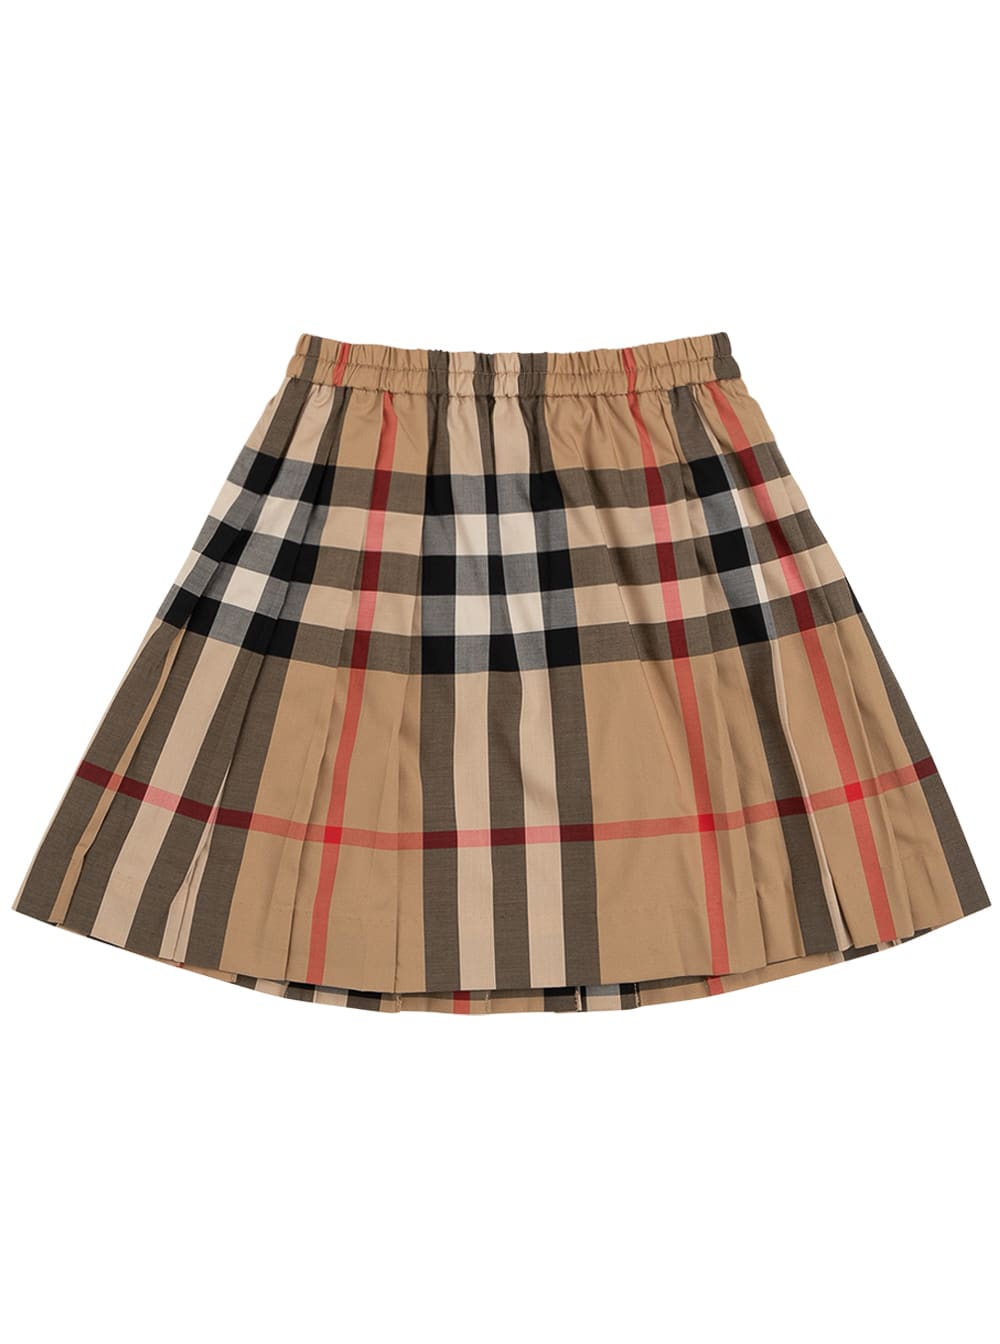 Burberry Vintage Check Cotton Pleated Skirt